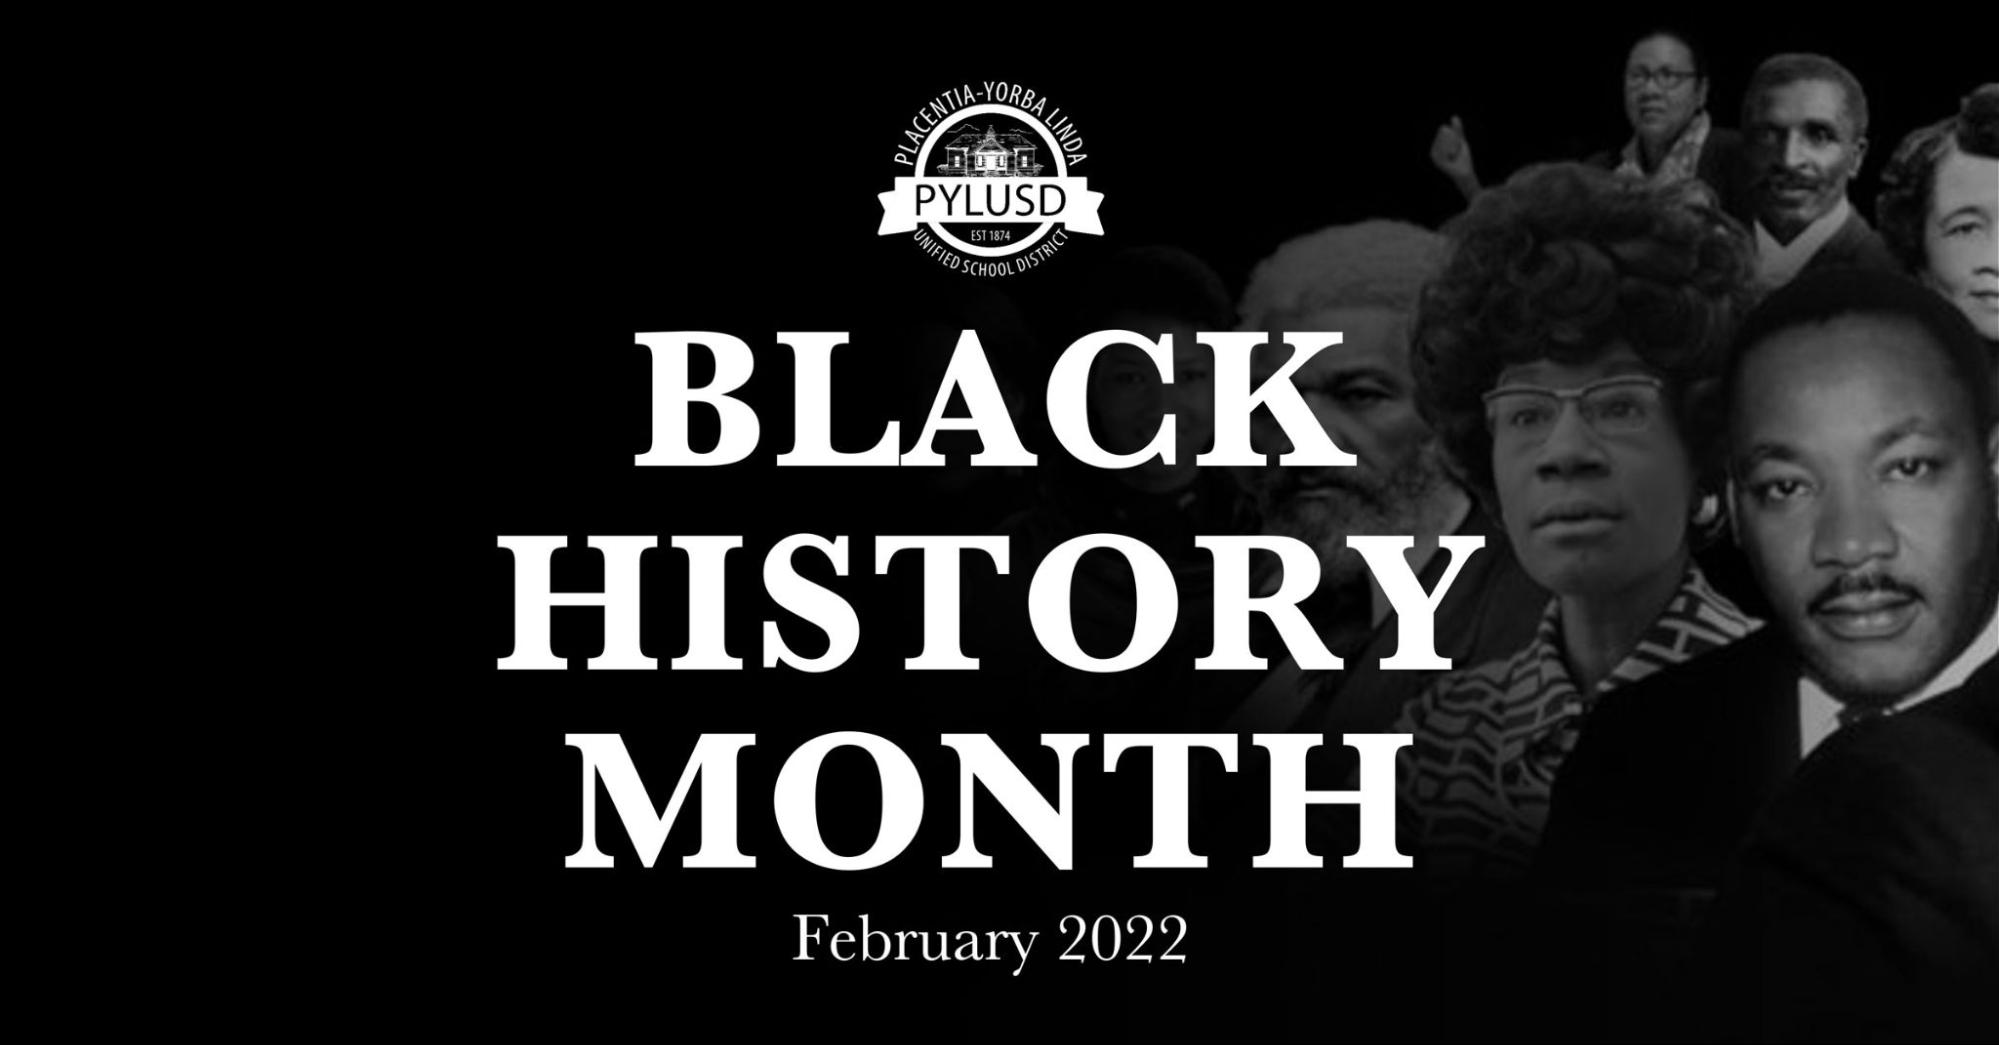 Black History Month graphic featuring Dr. MLK, Ruby Bridges, Frederick Douglass and other prominent Black figures.